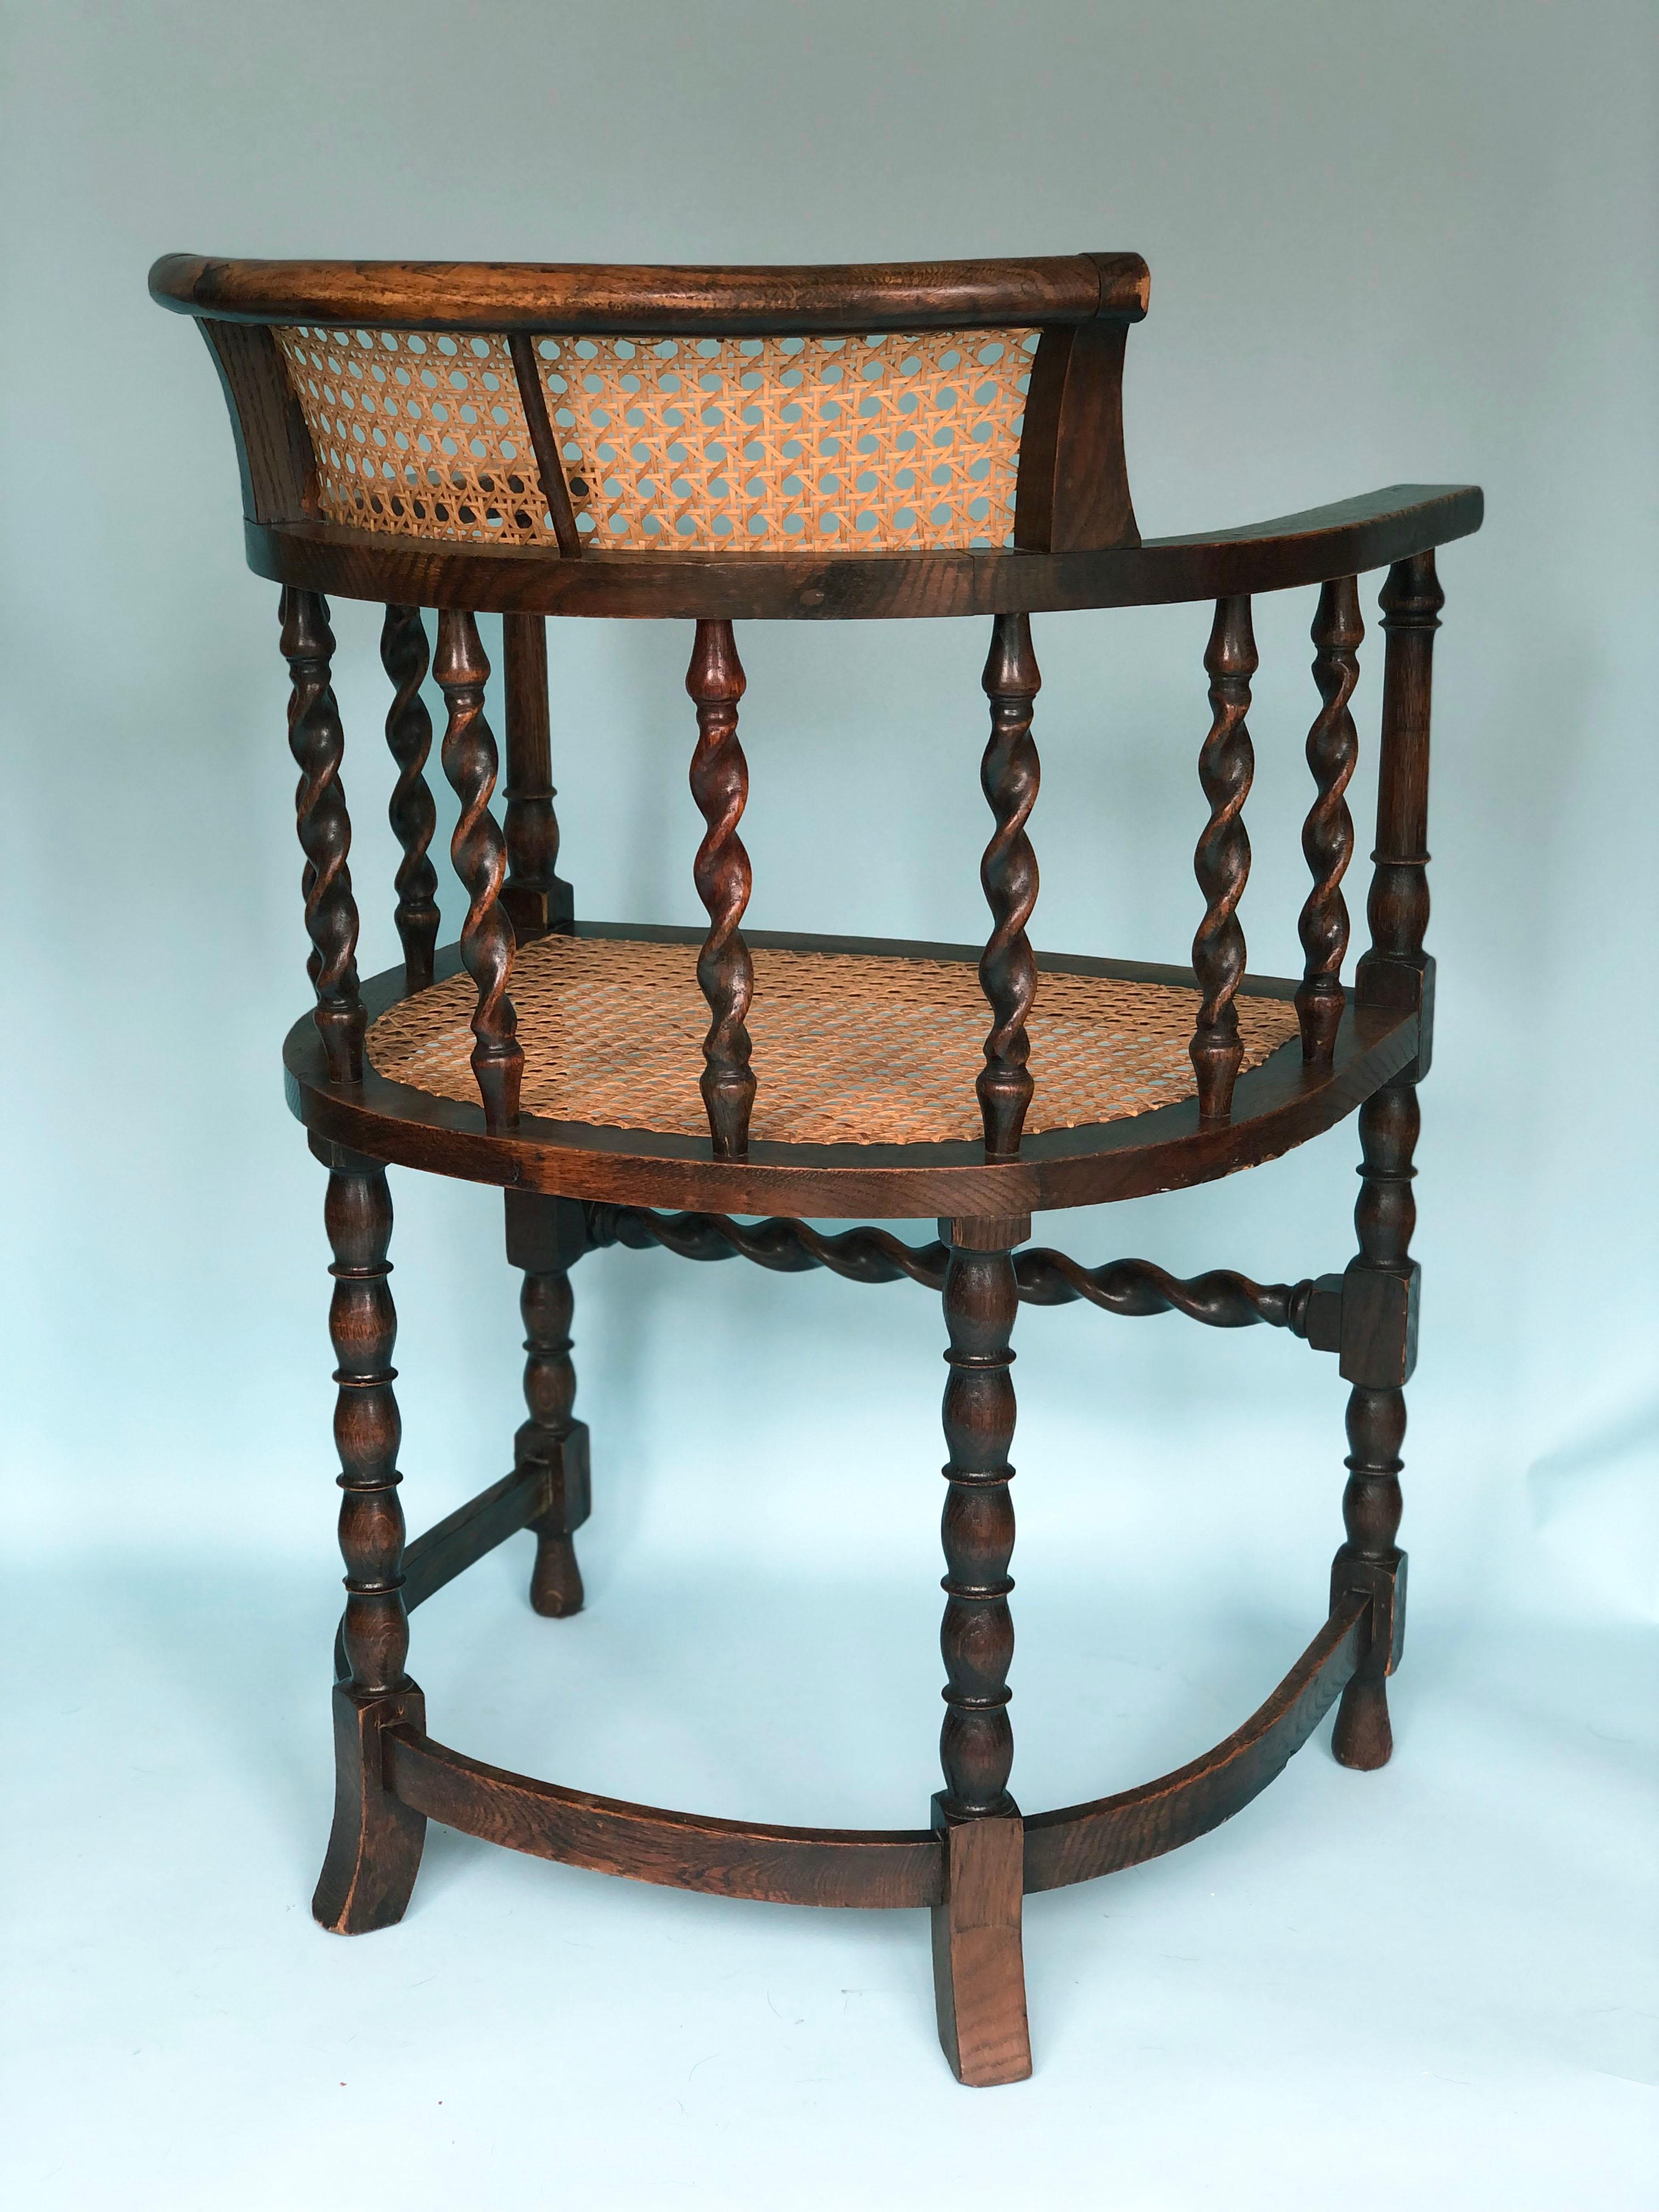 An English corner chair with barley twist supports and bobbin turned legs from the early 20th century. The beech wood chair and cane are in good condition. The cane seat is from a later period. 

Object: Armchair
Designer: Unknown
Style: